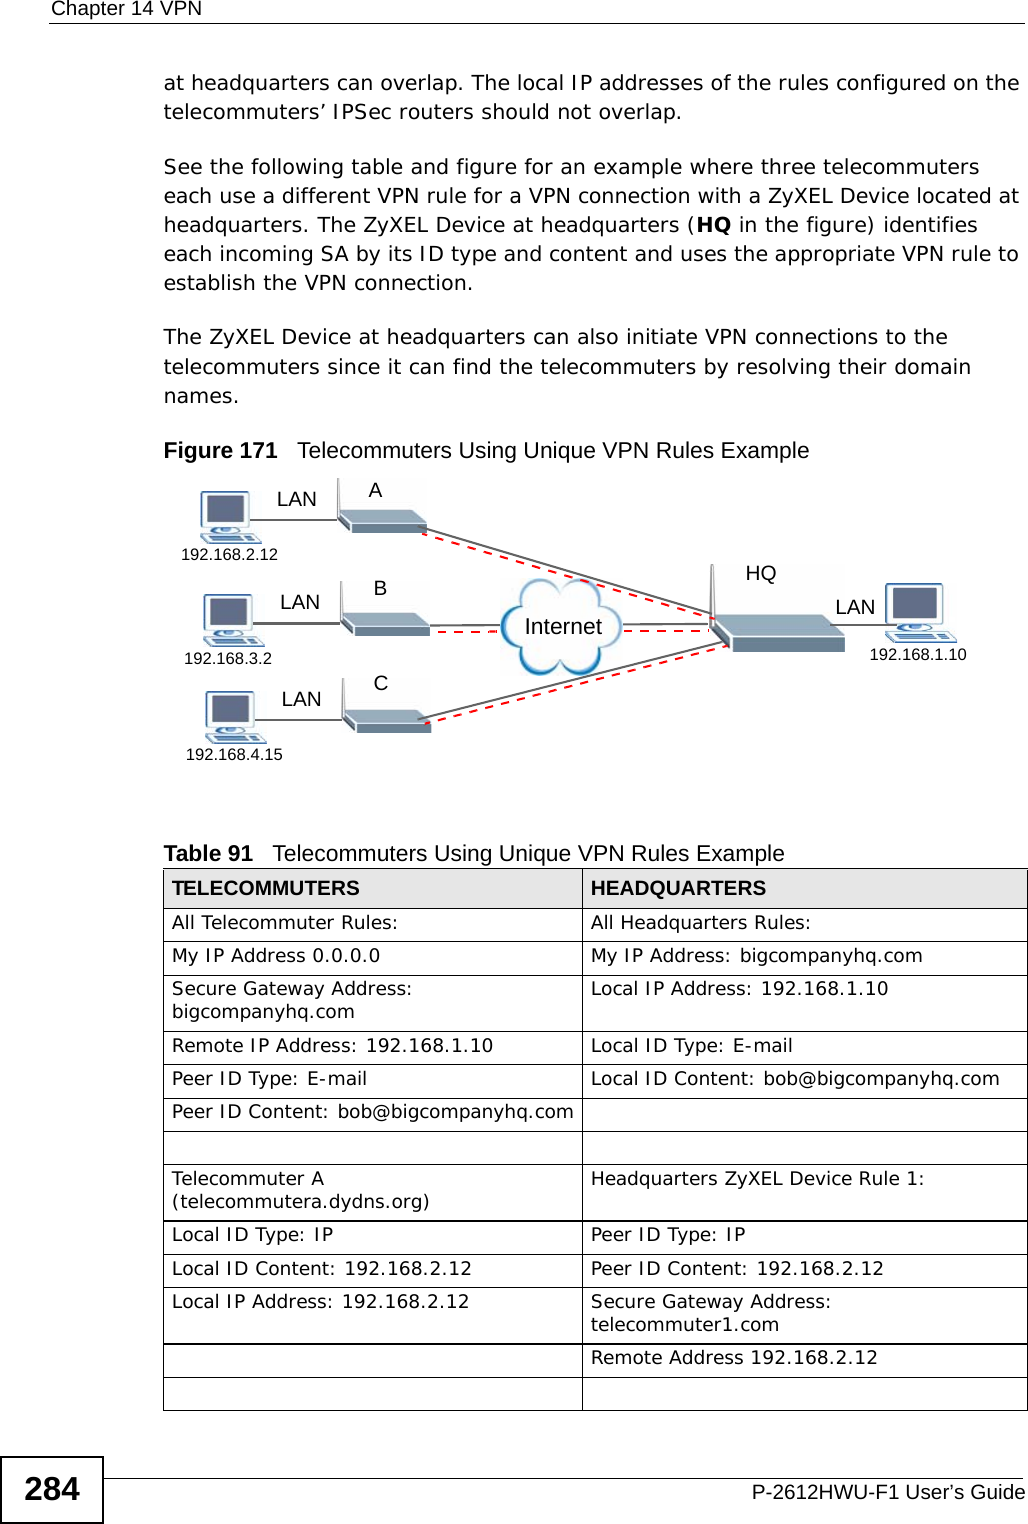 Chapter 14 VPNP-2612HWU-F1 User’s Guide284at headquarters can overlap. The local IP addresses of the rules configured on the telecommuters’ IPSec routers should not overlap.See the following table and figure for an example where three telecommuters each use a different VPN rule for a VPN connection with a ZyXEL Device located at headquarters. The ZyXEL Device at headquarters (HQ in the figure) identifies each incoming SA by its ID type and content and uses the appropriate VPN rule to establish the VPN connection. The ZyXEL Device at headquarters can also initiate VPN connections to the telecommuters since it can find the telecommuters by resolving their domain names.Figure 171   Telecommuters Using Unique VPN Rules ExampleTable 91   Telecommuters Using Unique VPN Rules ExampleTELECOMMUTERS HEADQUARTERSAll Telecommuter Rules: All Headquarters Rules:My IP Address 0.0.0.0 My IP Address: bigcompanyhq.comSecure Gateway Address: bigcompanyhq.com Local IP Address: 192.168.1.10Remote IP Address: 192.168.1.10 Local ID Type: E-mailPeer ID Type: E-mail Local ID Content: bob@bigcompanyhq.comPeer ID Content: bob@bigcompanyhq.comTelecommuter A (telecommutera.dydns.org) Headquarters ZyXEL Device Rule 1:Local ID Type: IP Peer ID Type: IPLocal ID Content: 192.168.2.12 Peer ID Content: 192.168.2.12Local IP Address: 192.168.2.12 Secure Gateway Address: telecommuter1.comRemote Address 192.168.2.12LAN192.168.2.12LAN192.168.3.2LAN192.168.4.15ABCLAN192.168.1.10HQInternet